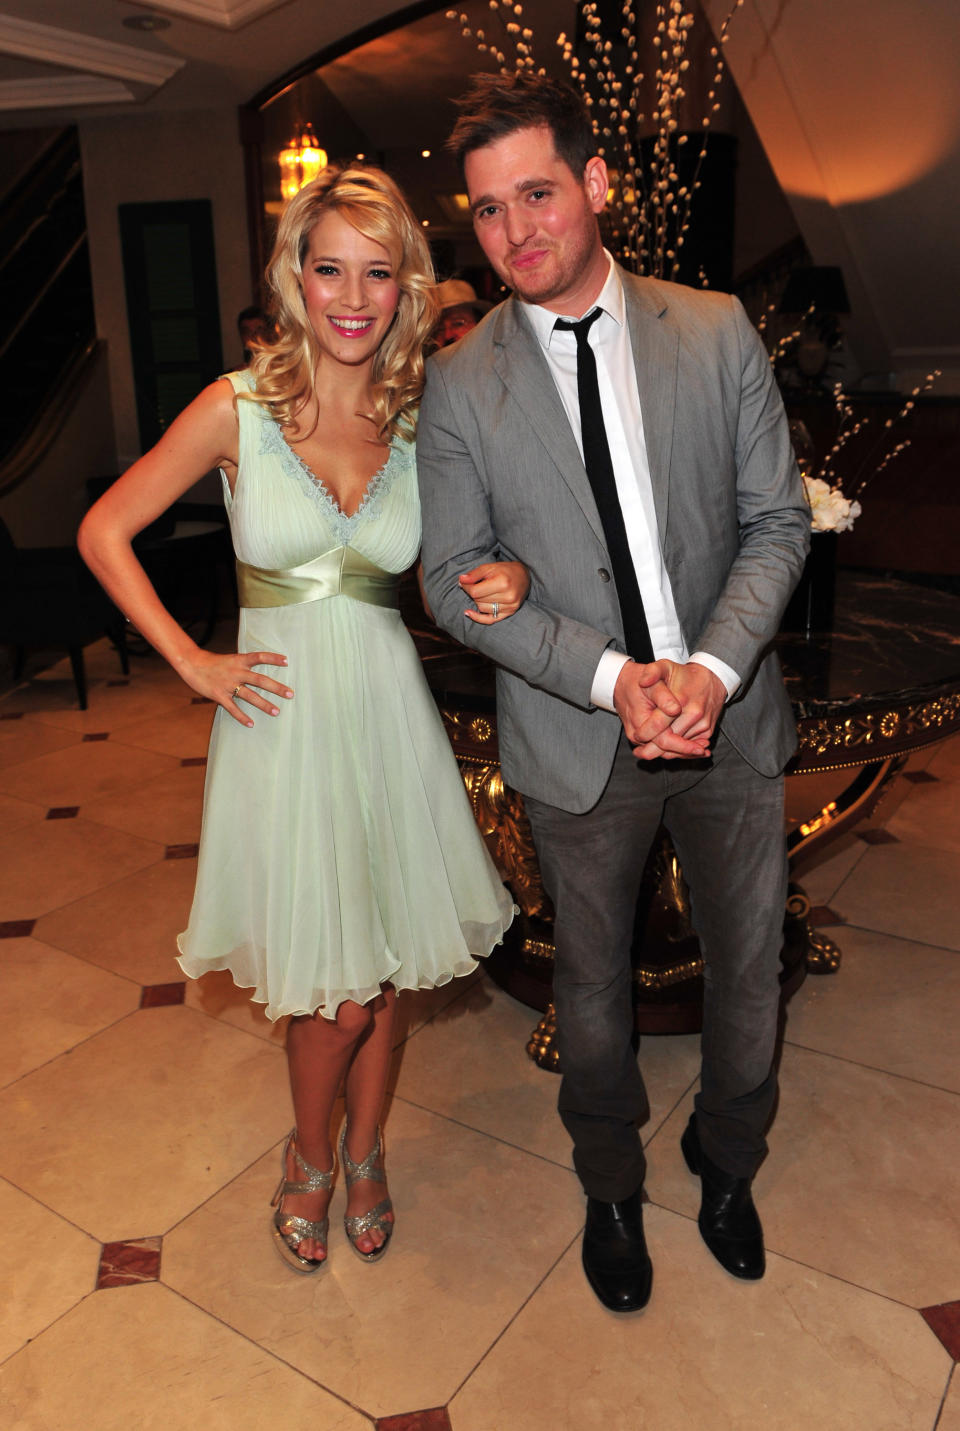 FILE - In this June 29, 2012 file photo, Argentine TV actress Luisana Lopilato, left, and husband singer Michael Buble arrive at the Nordoff Robbins 02 Silver Clef Awards at London Hilton, in London. Buble has sold millions of albums, but as he readies the release of his newest project, he’s less concerned with his future album sales, thanks to his wife’s pregnancy. “I'm nervous and excited, and truly I think it's given me great perspective,” the singer said at the music video shoot for his new single, “It's a Beautiful Day.” (Photo by Jon Furniss/Invision/AP, File)